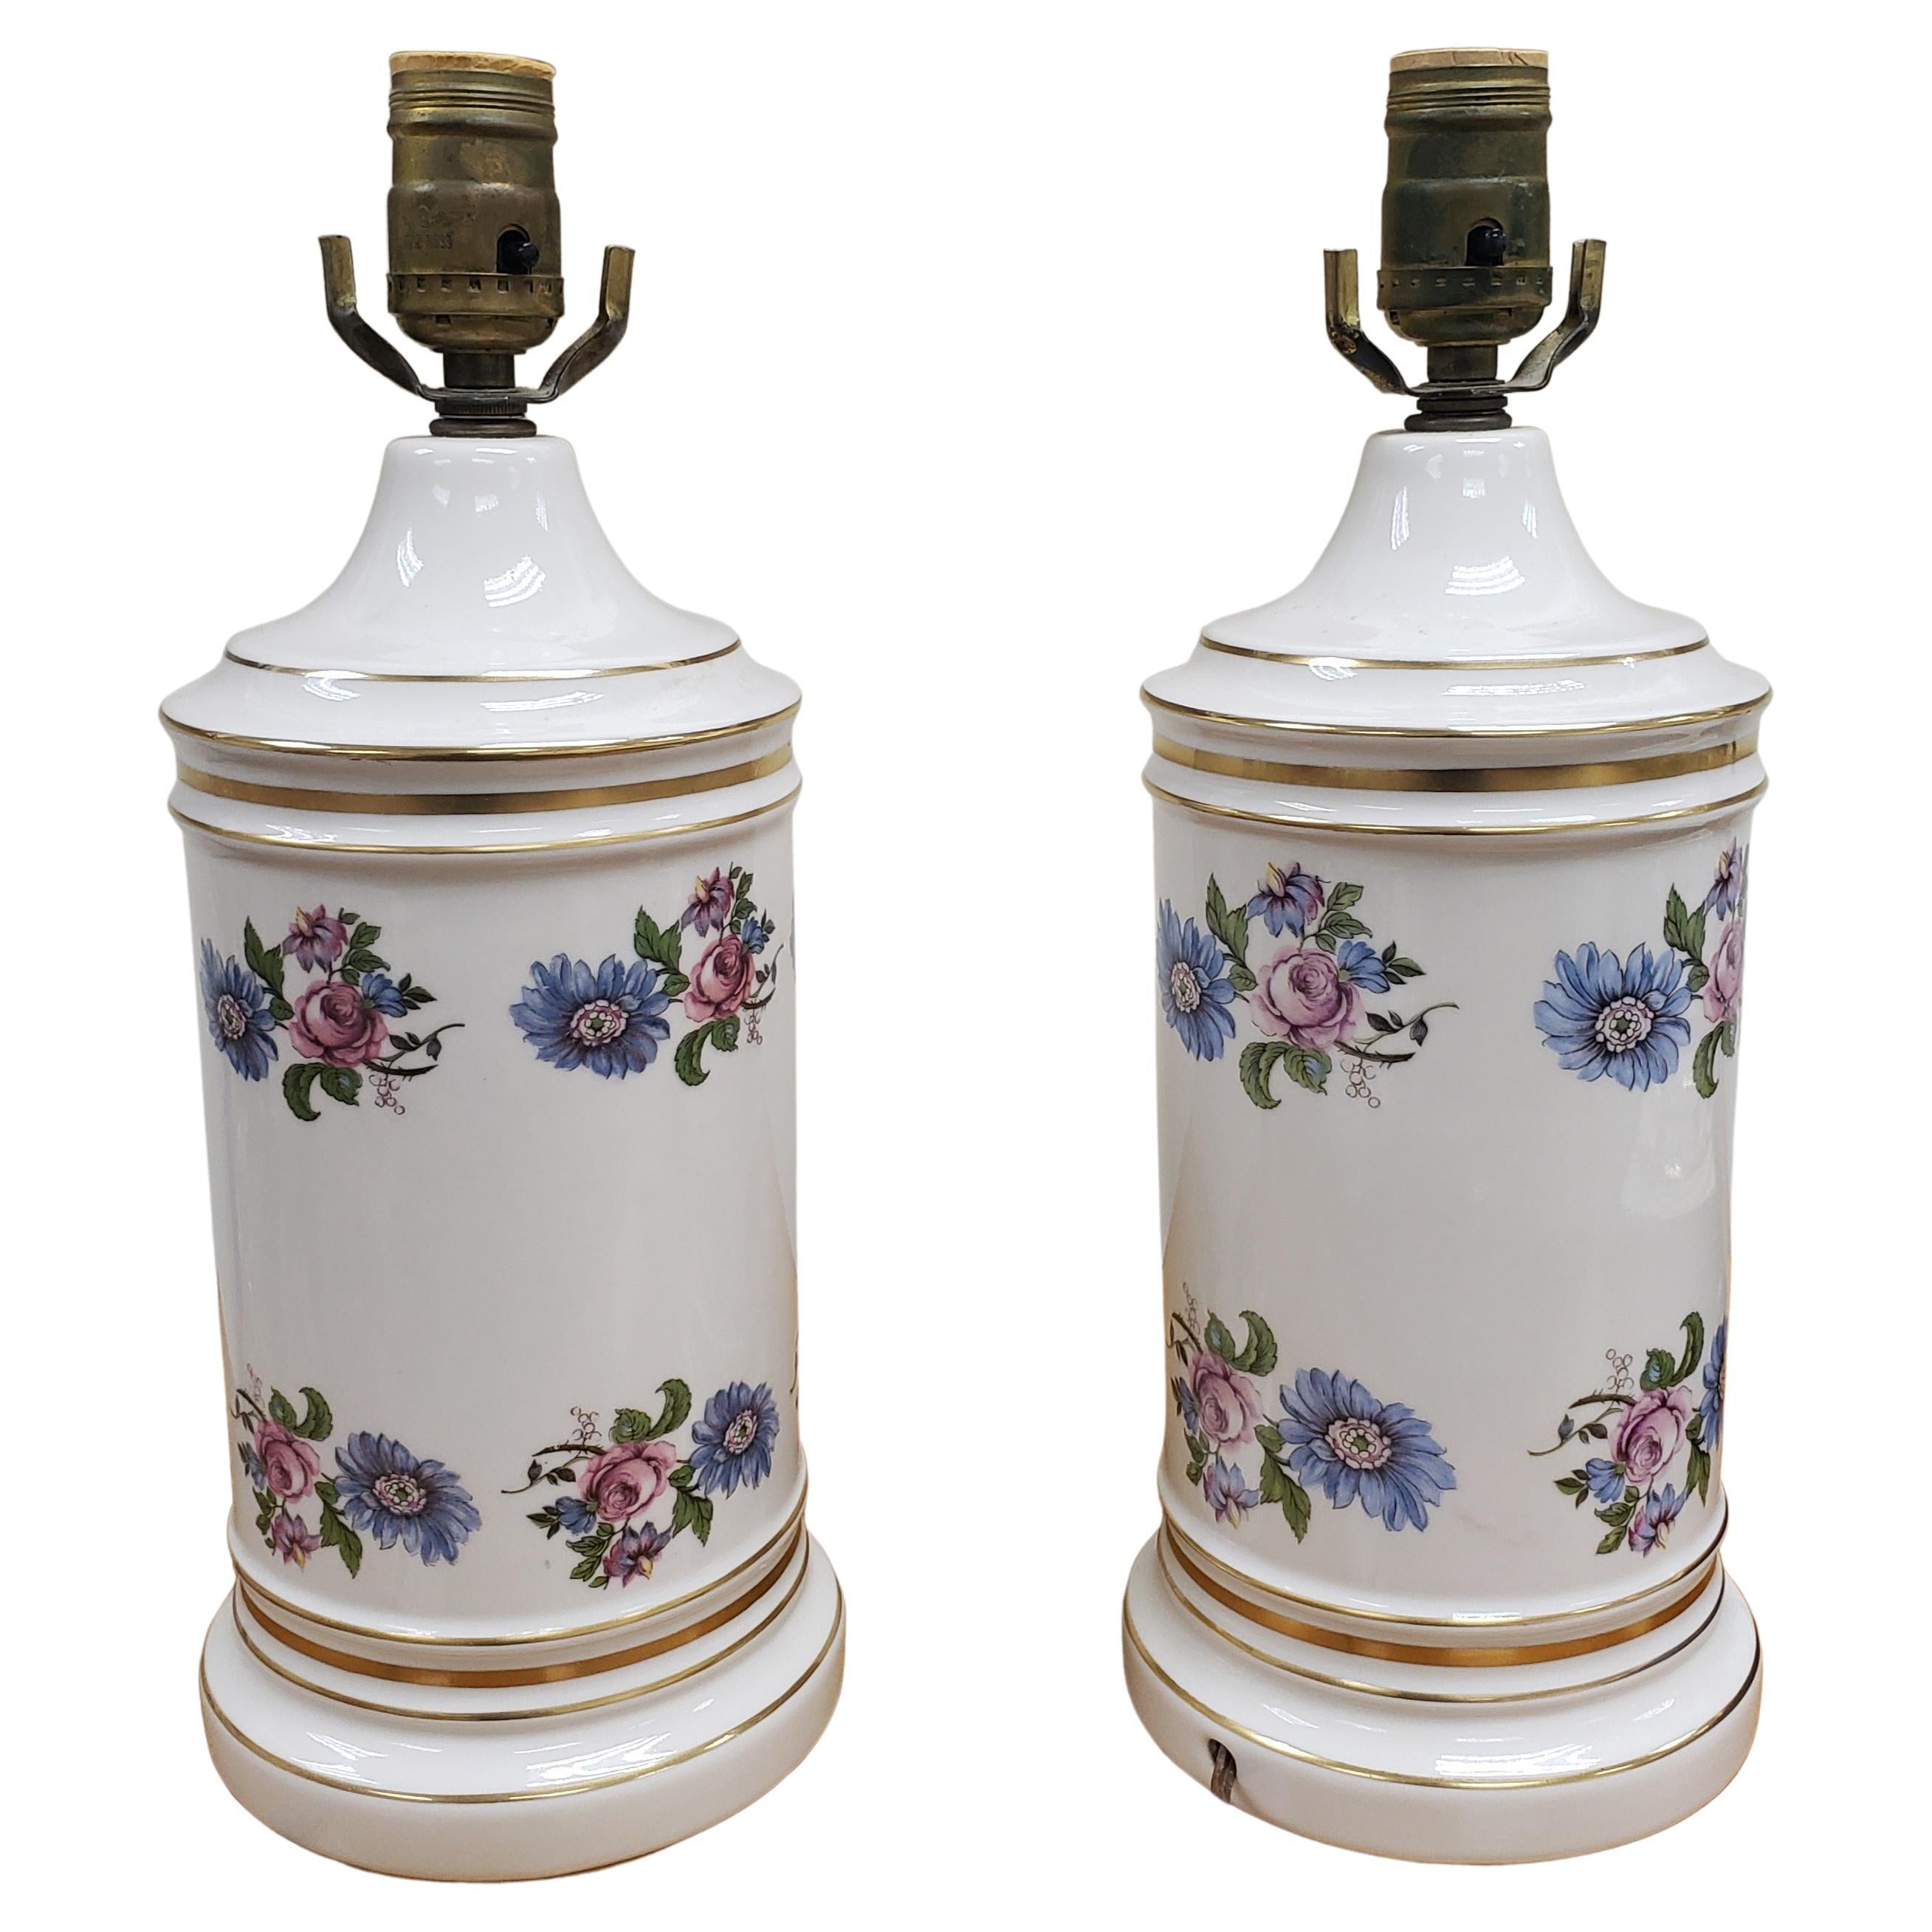 Hong Kong Oriental Porcelain Gold Trim and Flower Painted Ginger Jar Table Lamps, a Pair For Sale